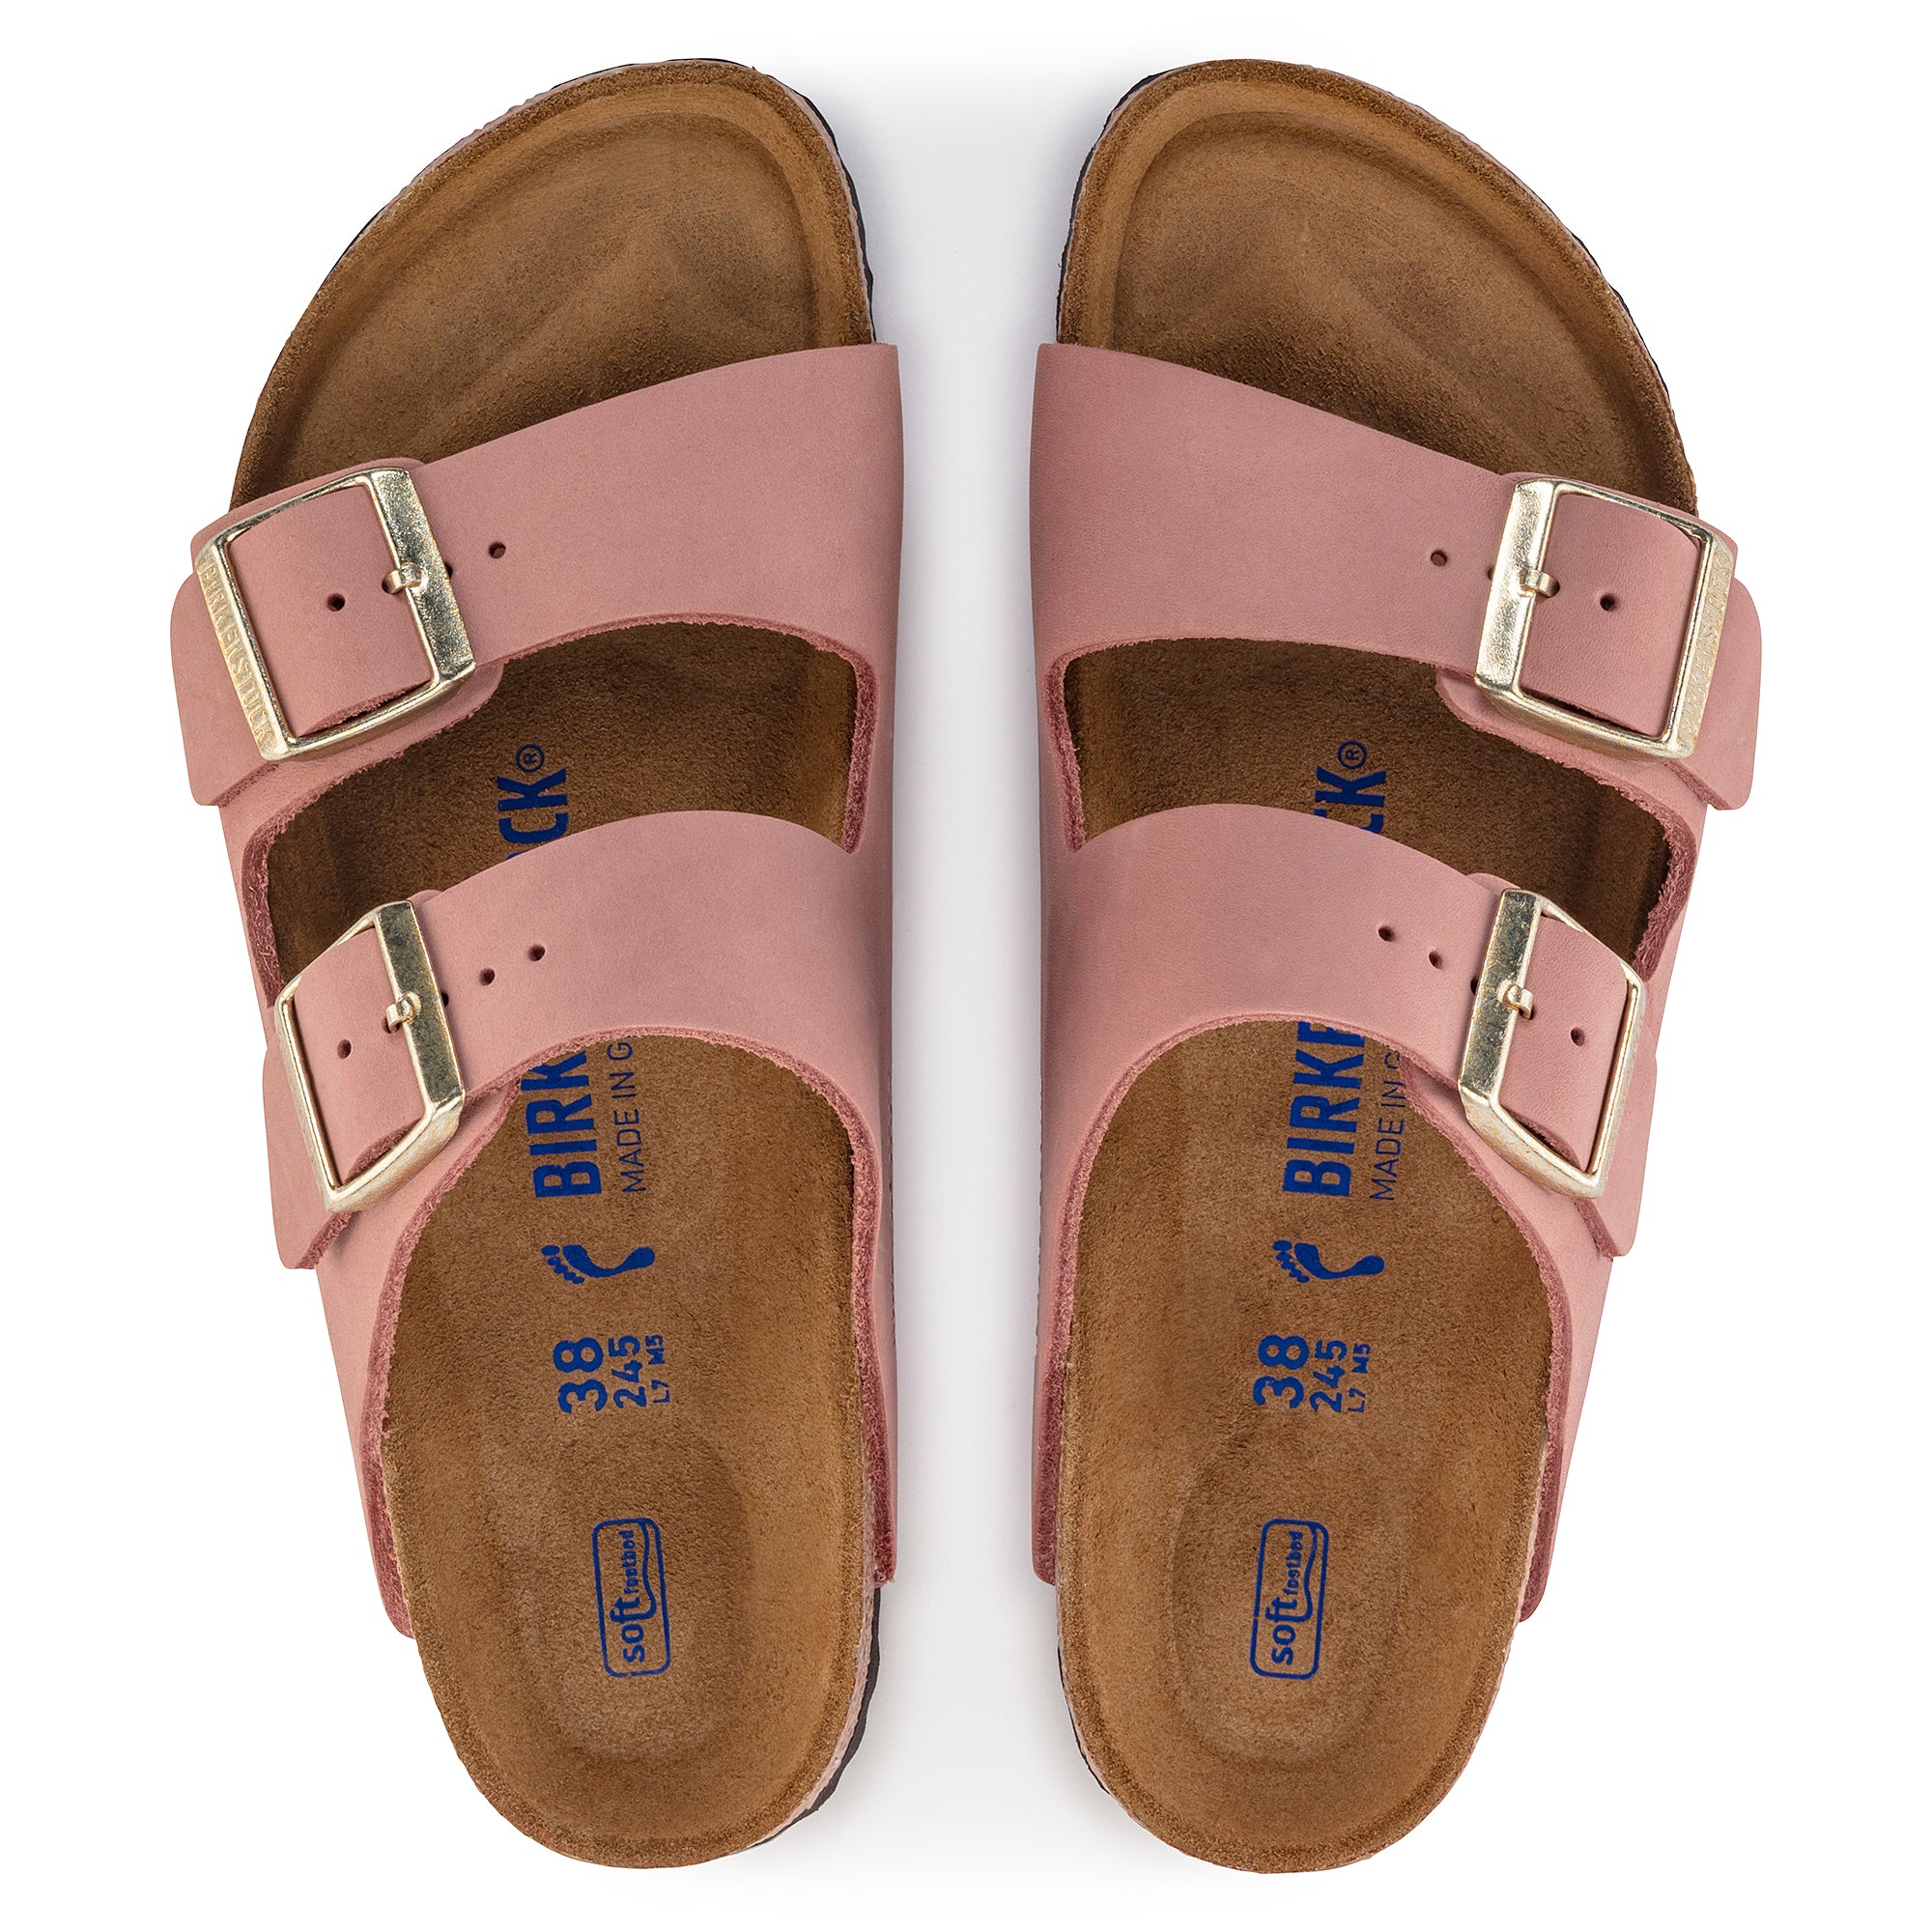 Arizona Nubuck Leather in Old Rose (Soft Footbed)